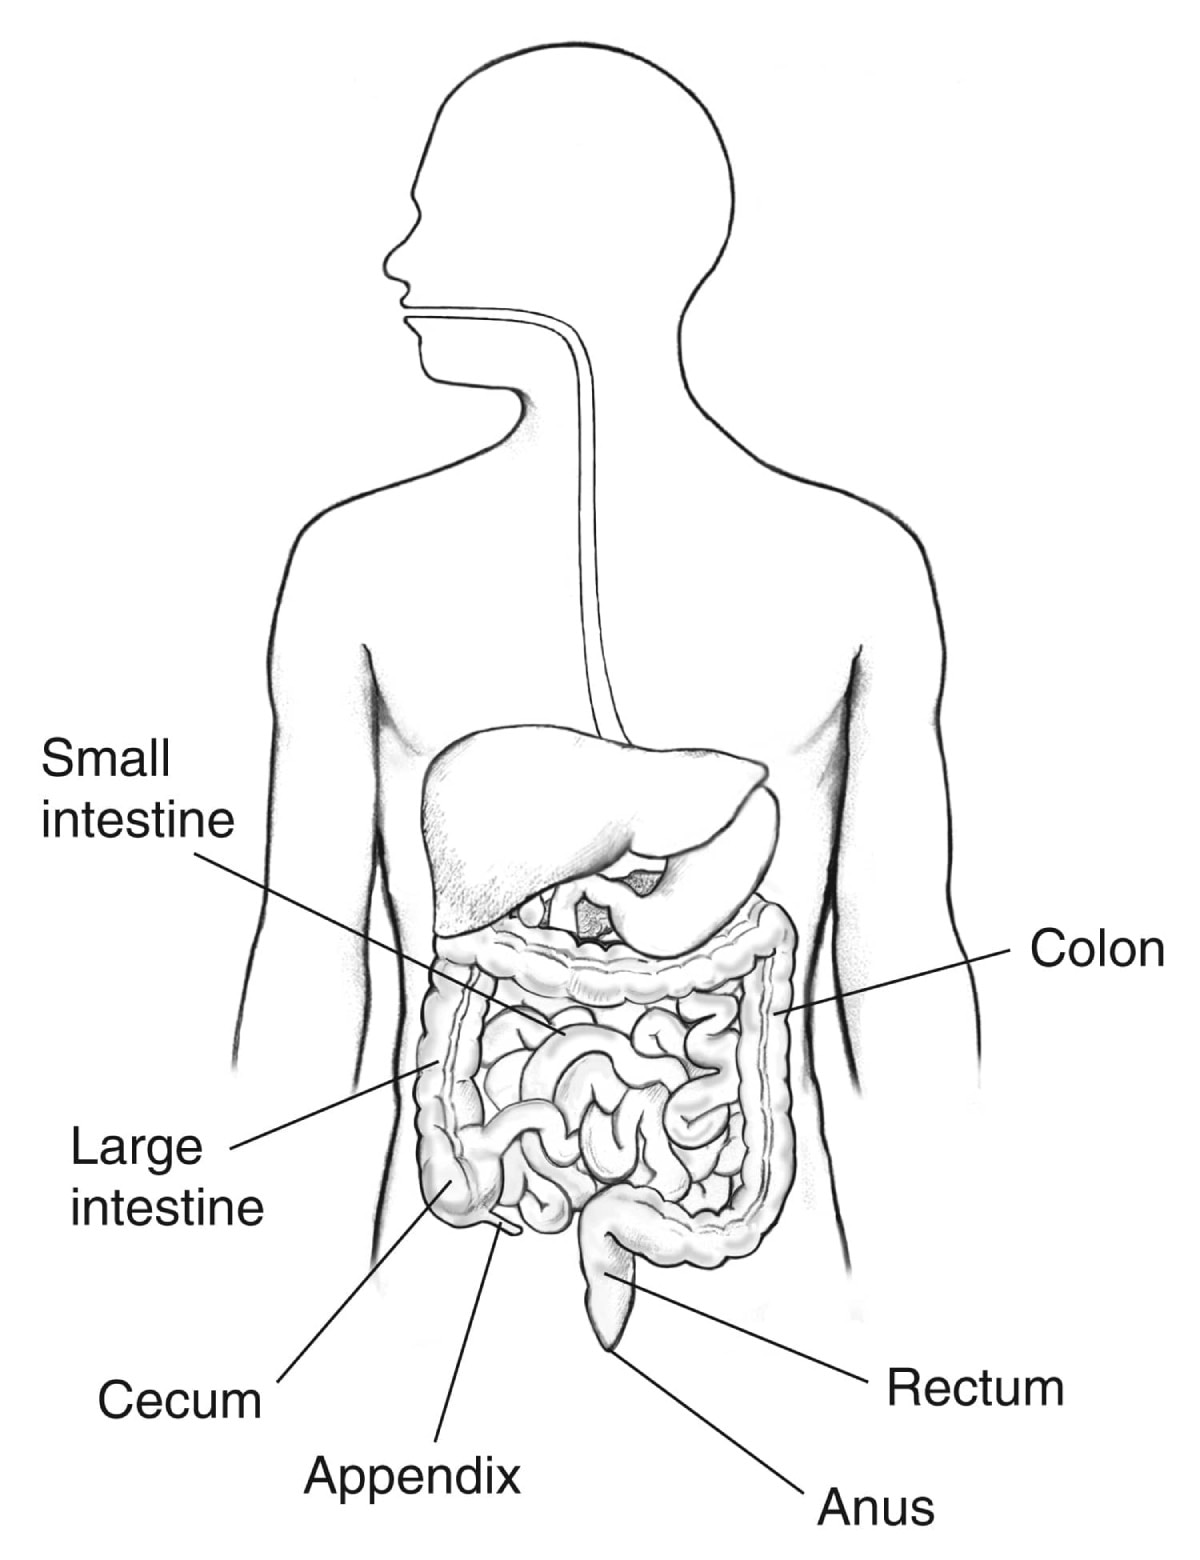 Diagram of the digestive tract with labels for the small intestine, large intestine, cecum, appendix, anus, rectum, and colon.